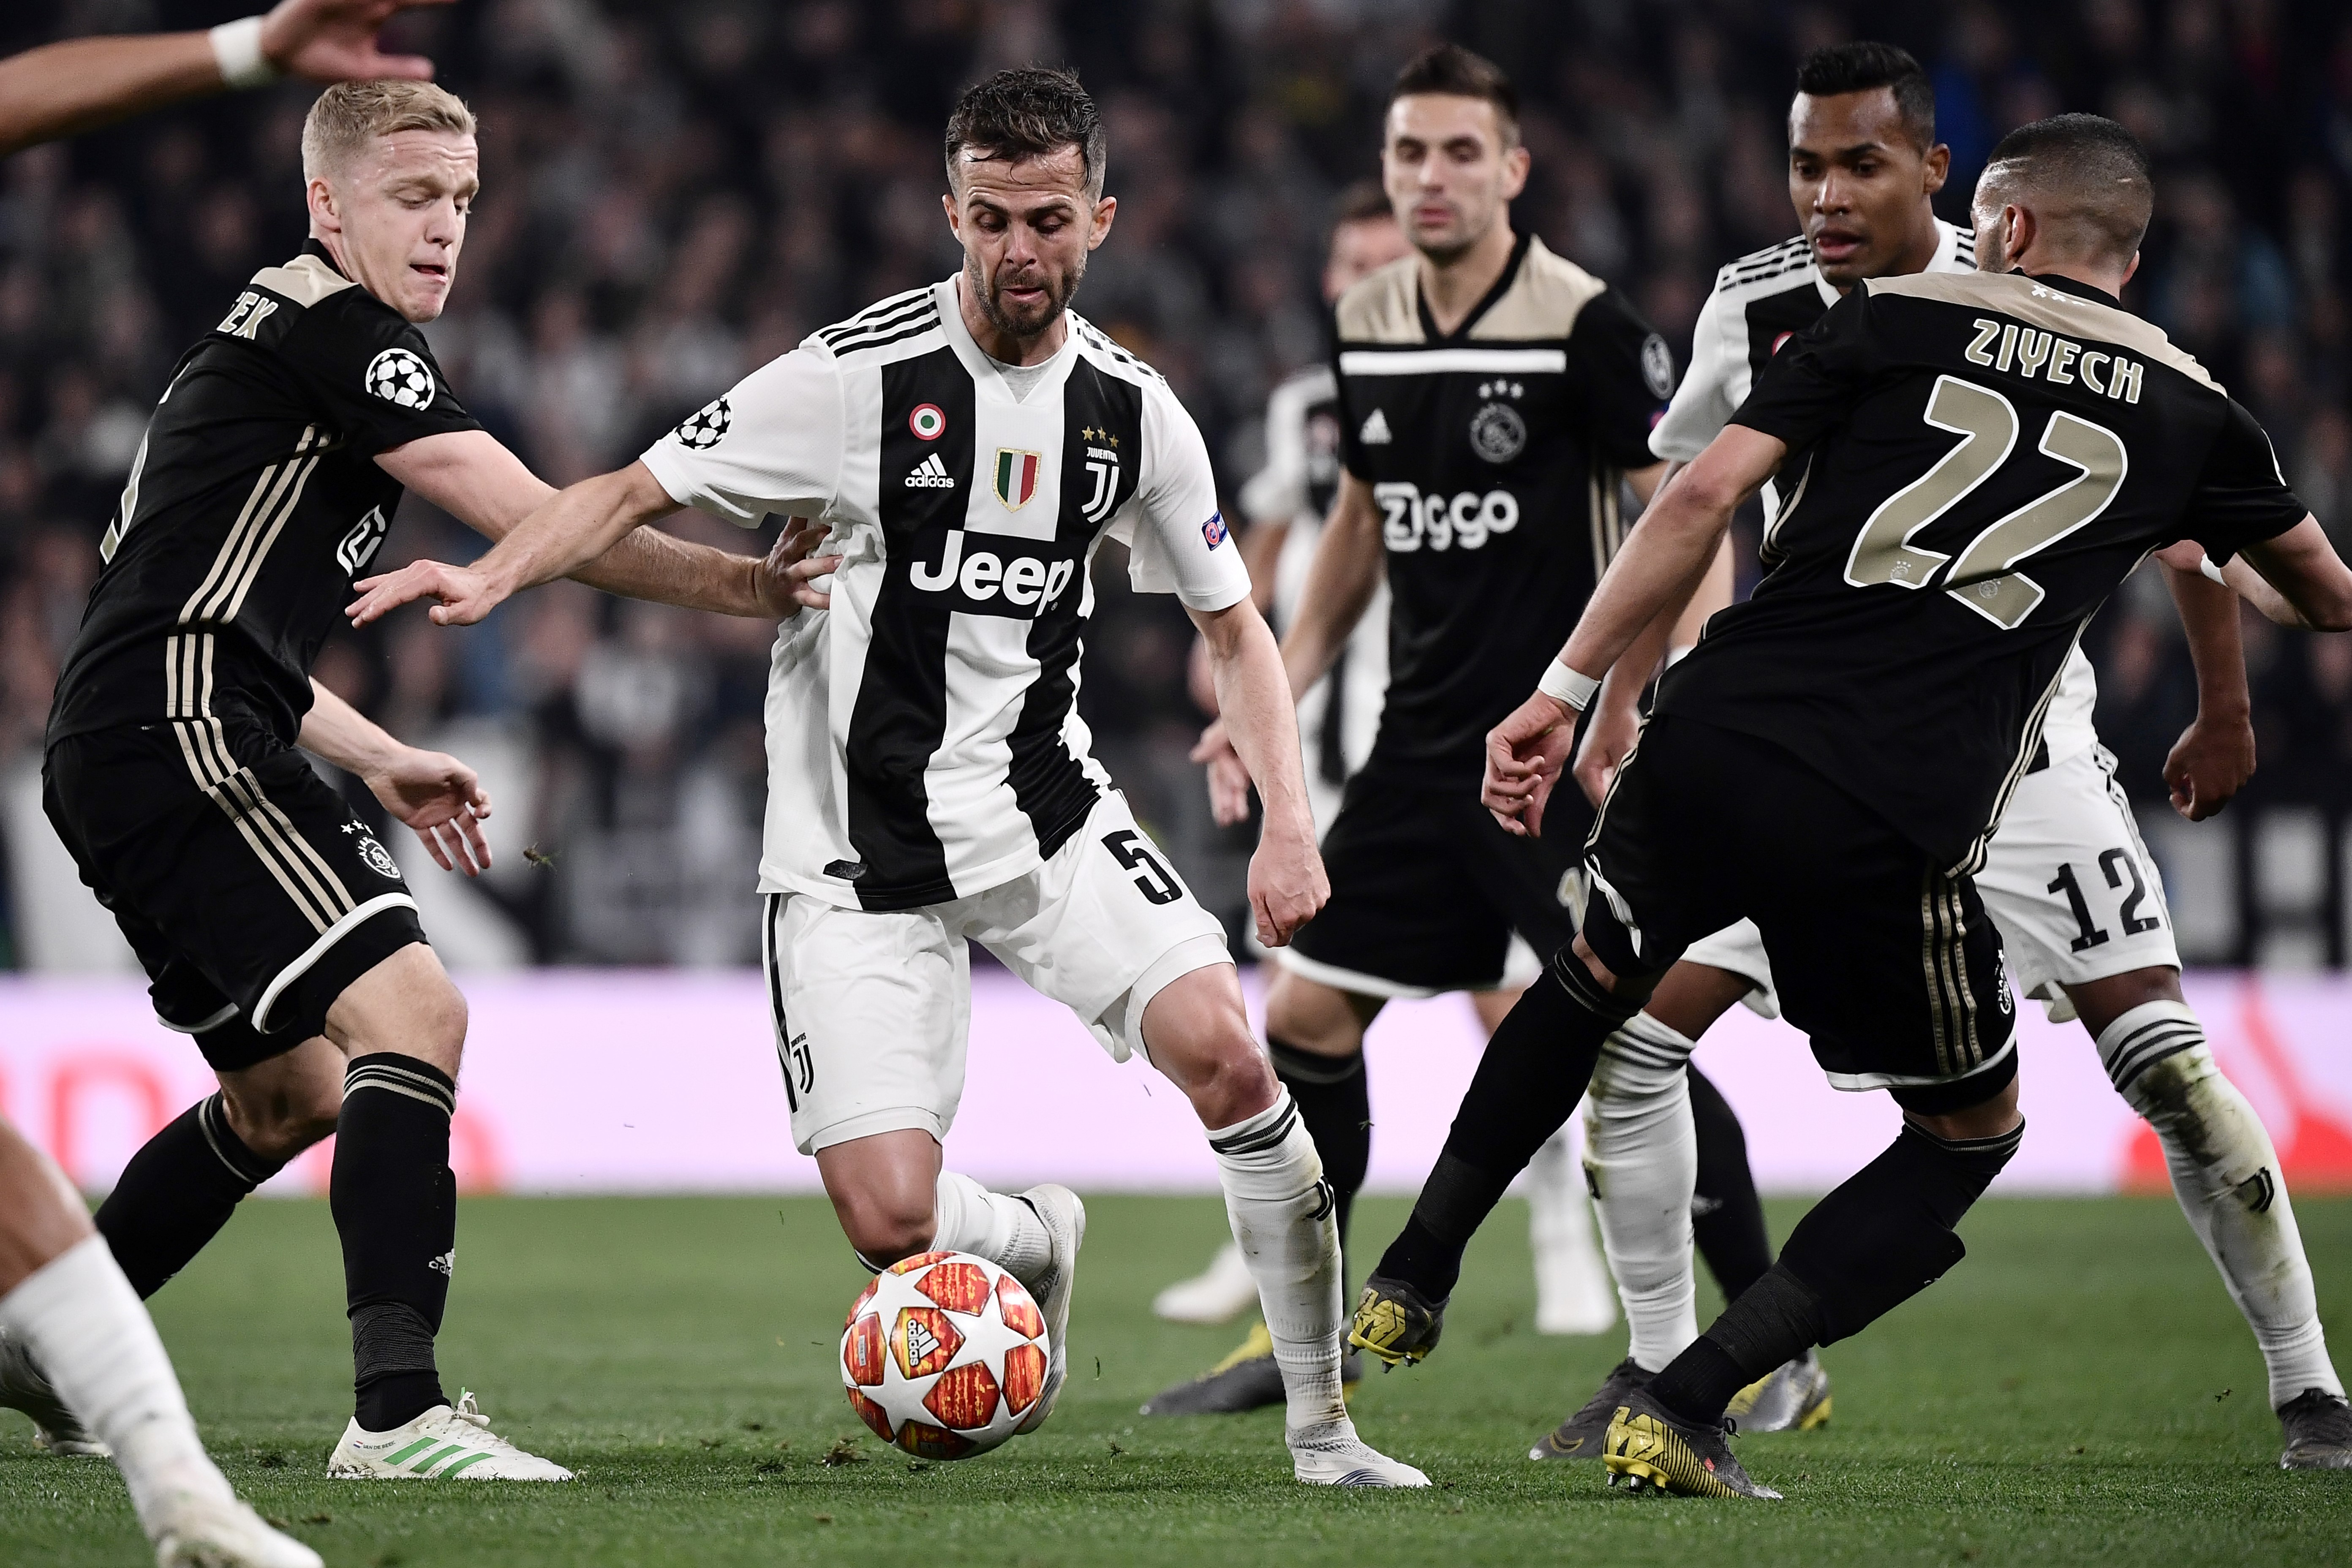 Italian giants Juventus are eyeing January move for out of favour Manchester United star, Donny van de Beek